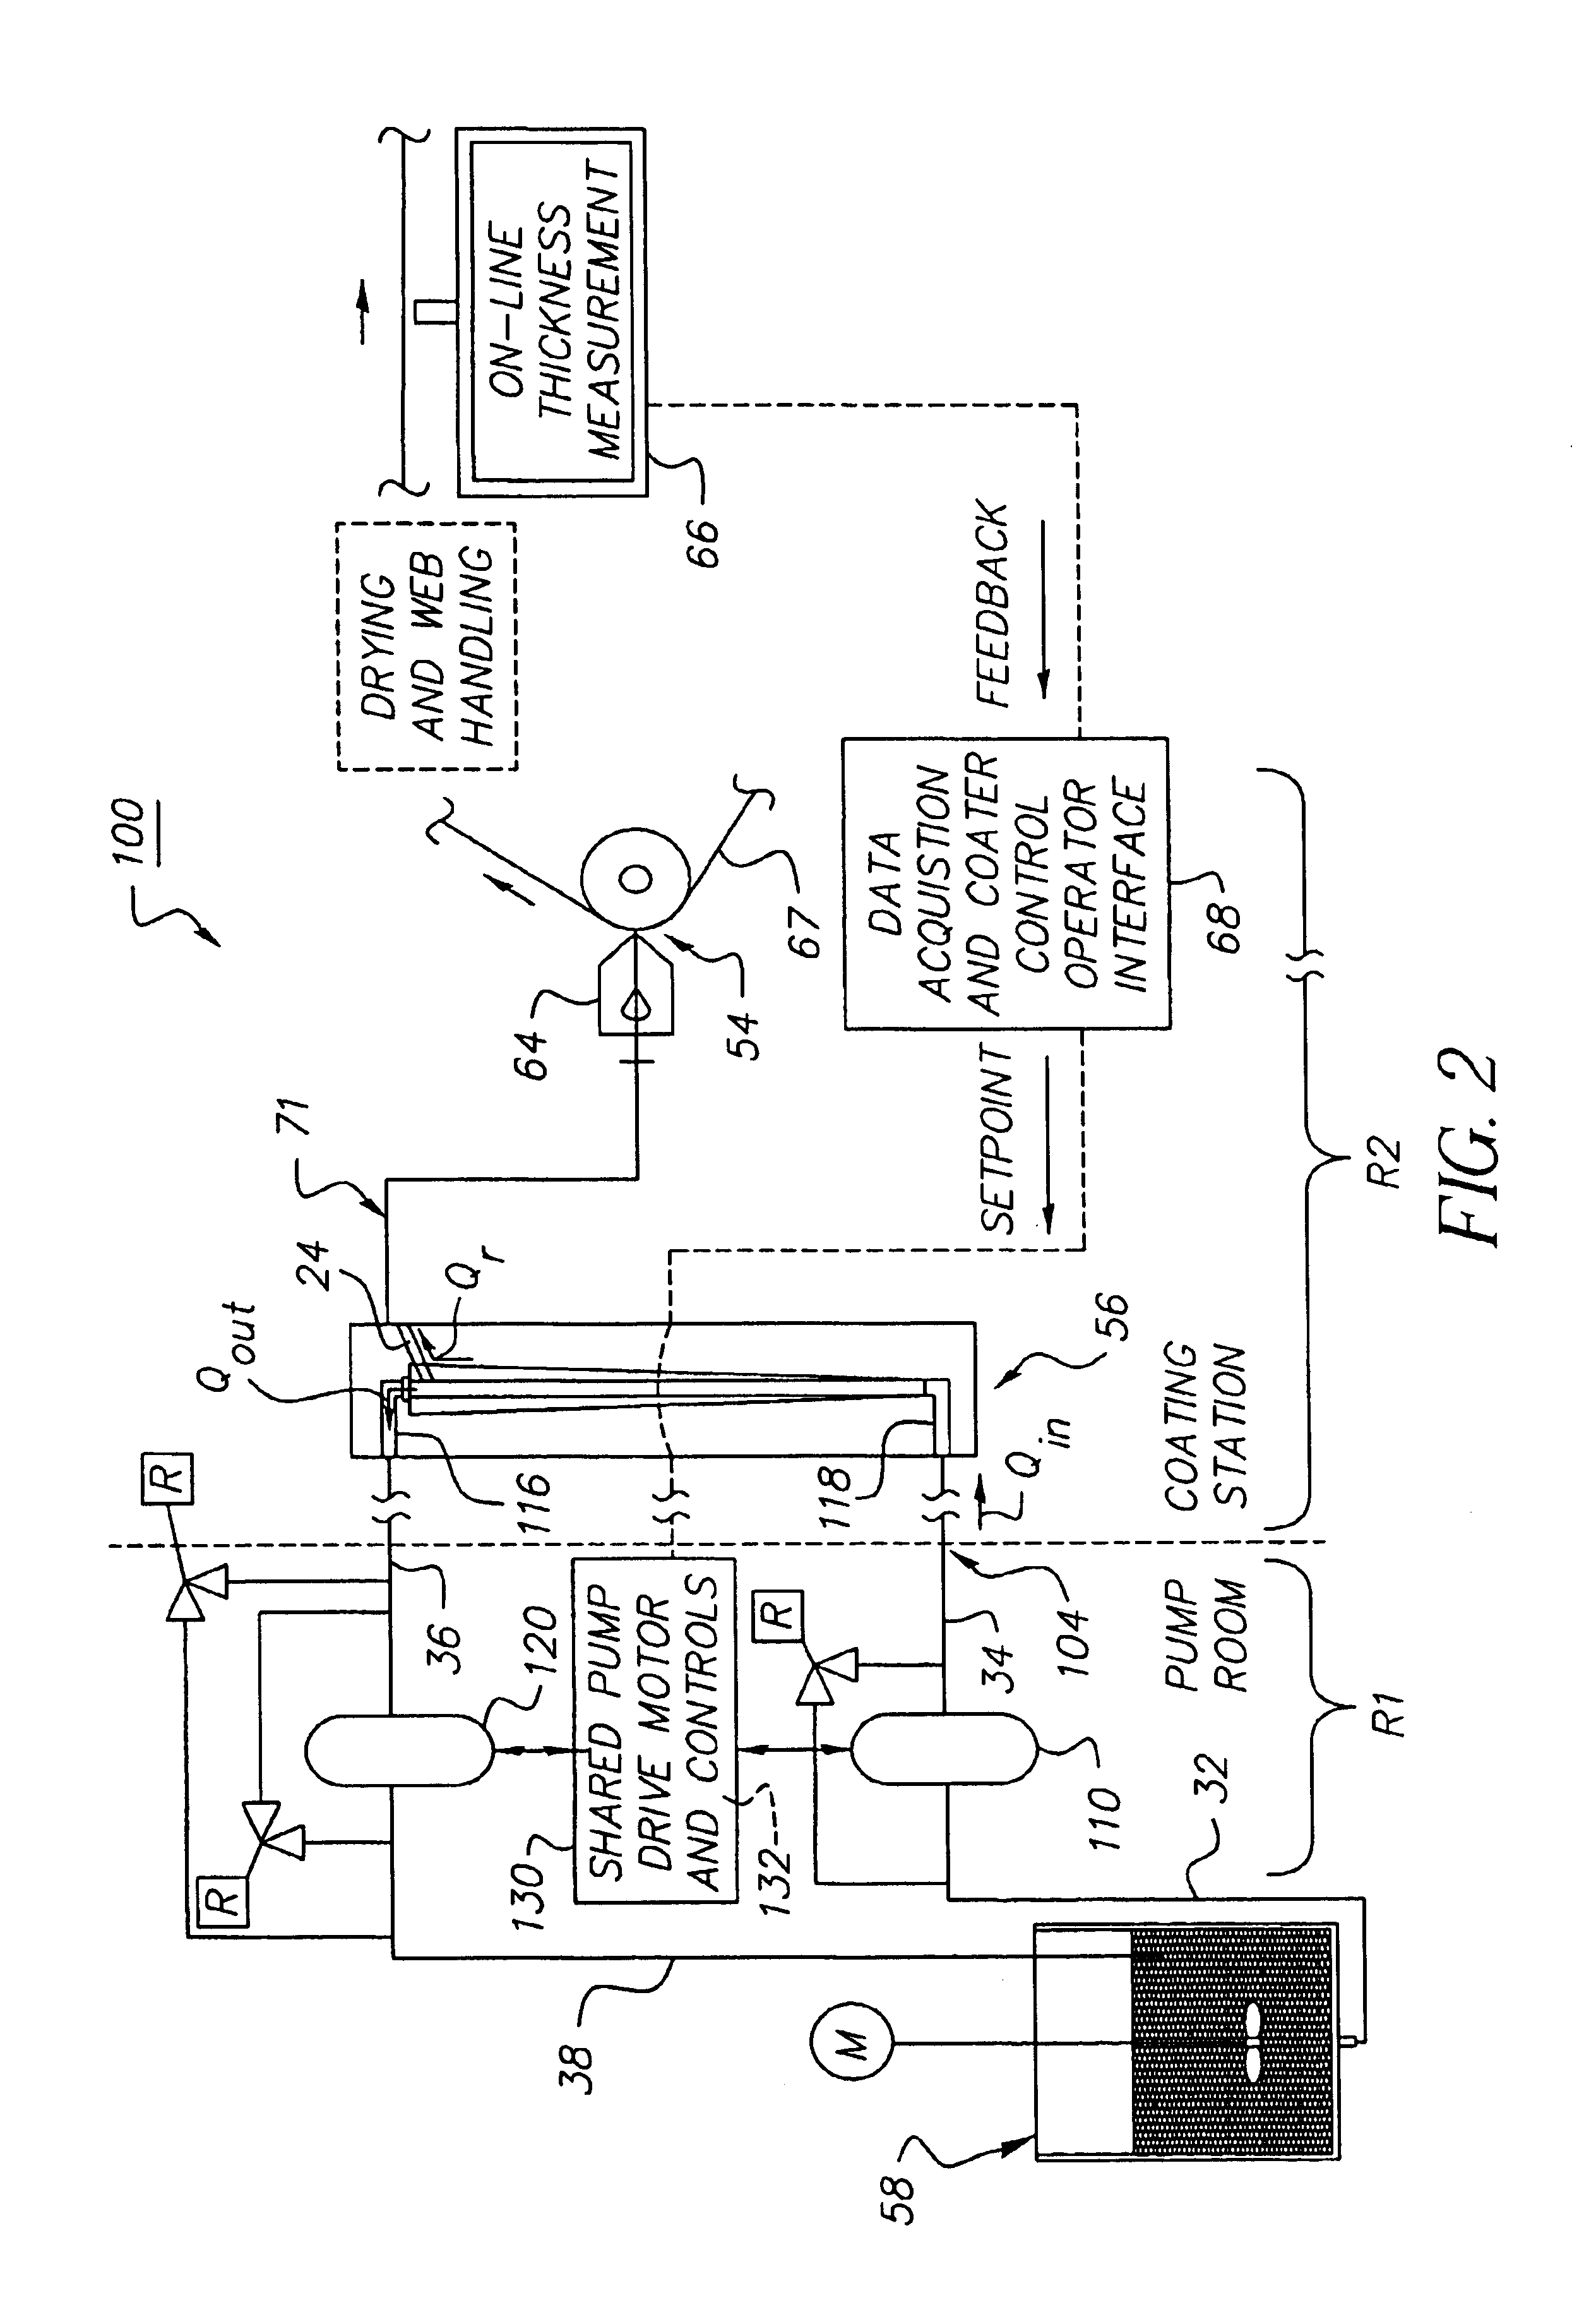 Fluid separation and delivery apparatus and method